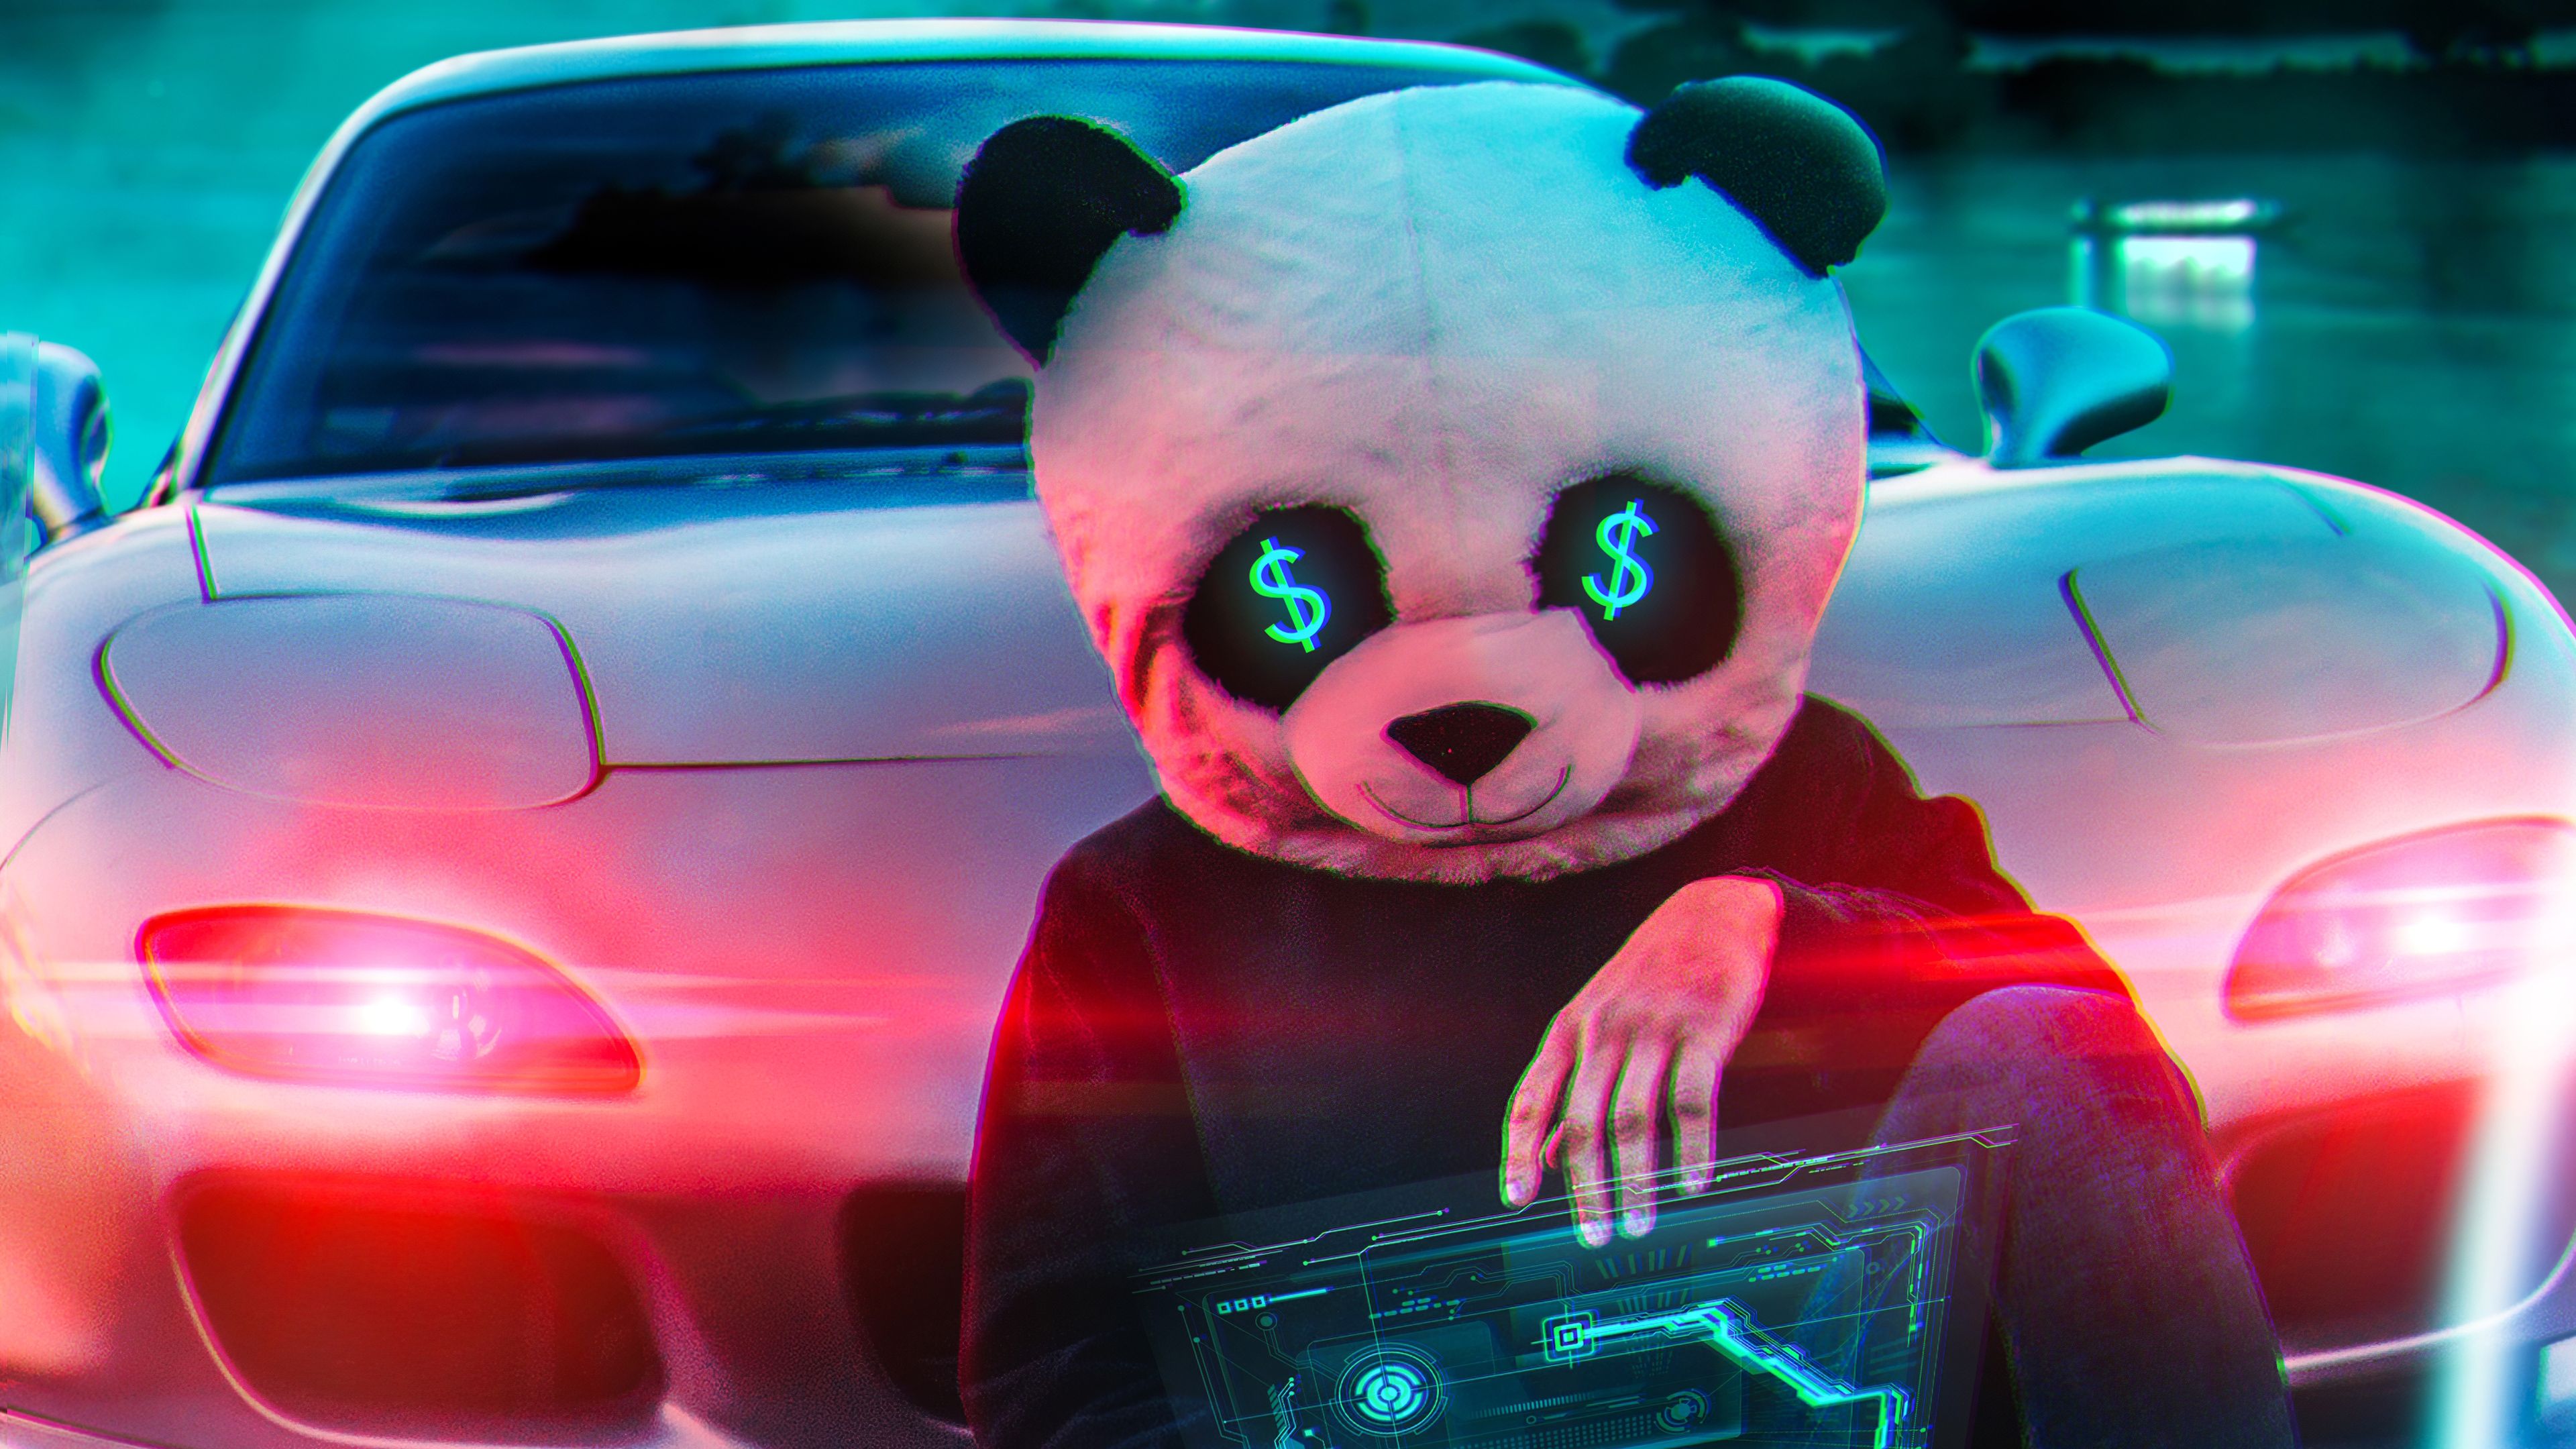 Panda Money Guy 4k, HD Artist, 4k Wallpaper, Image, Background, Photo and Picture